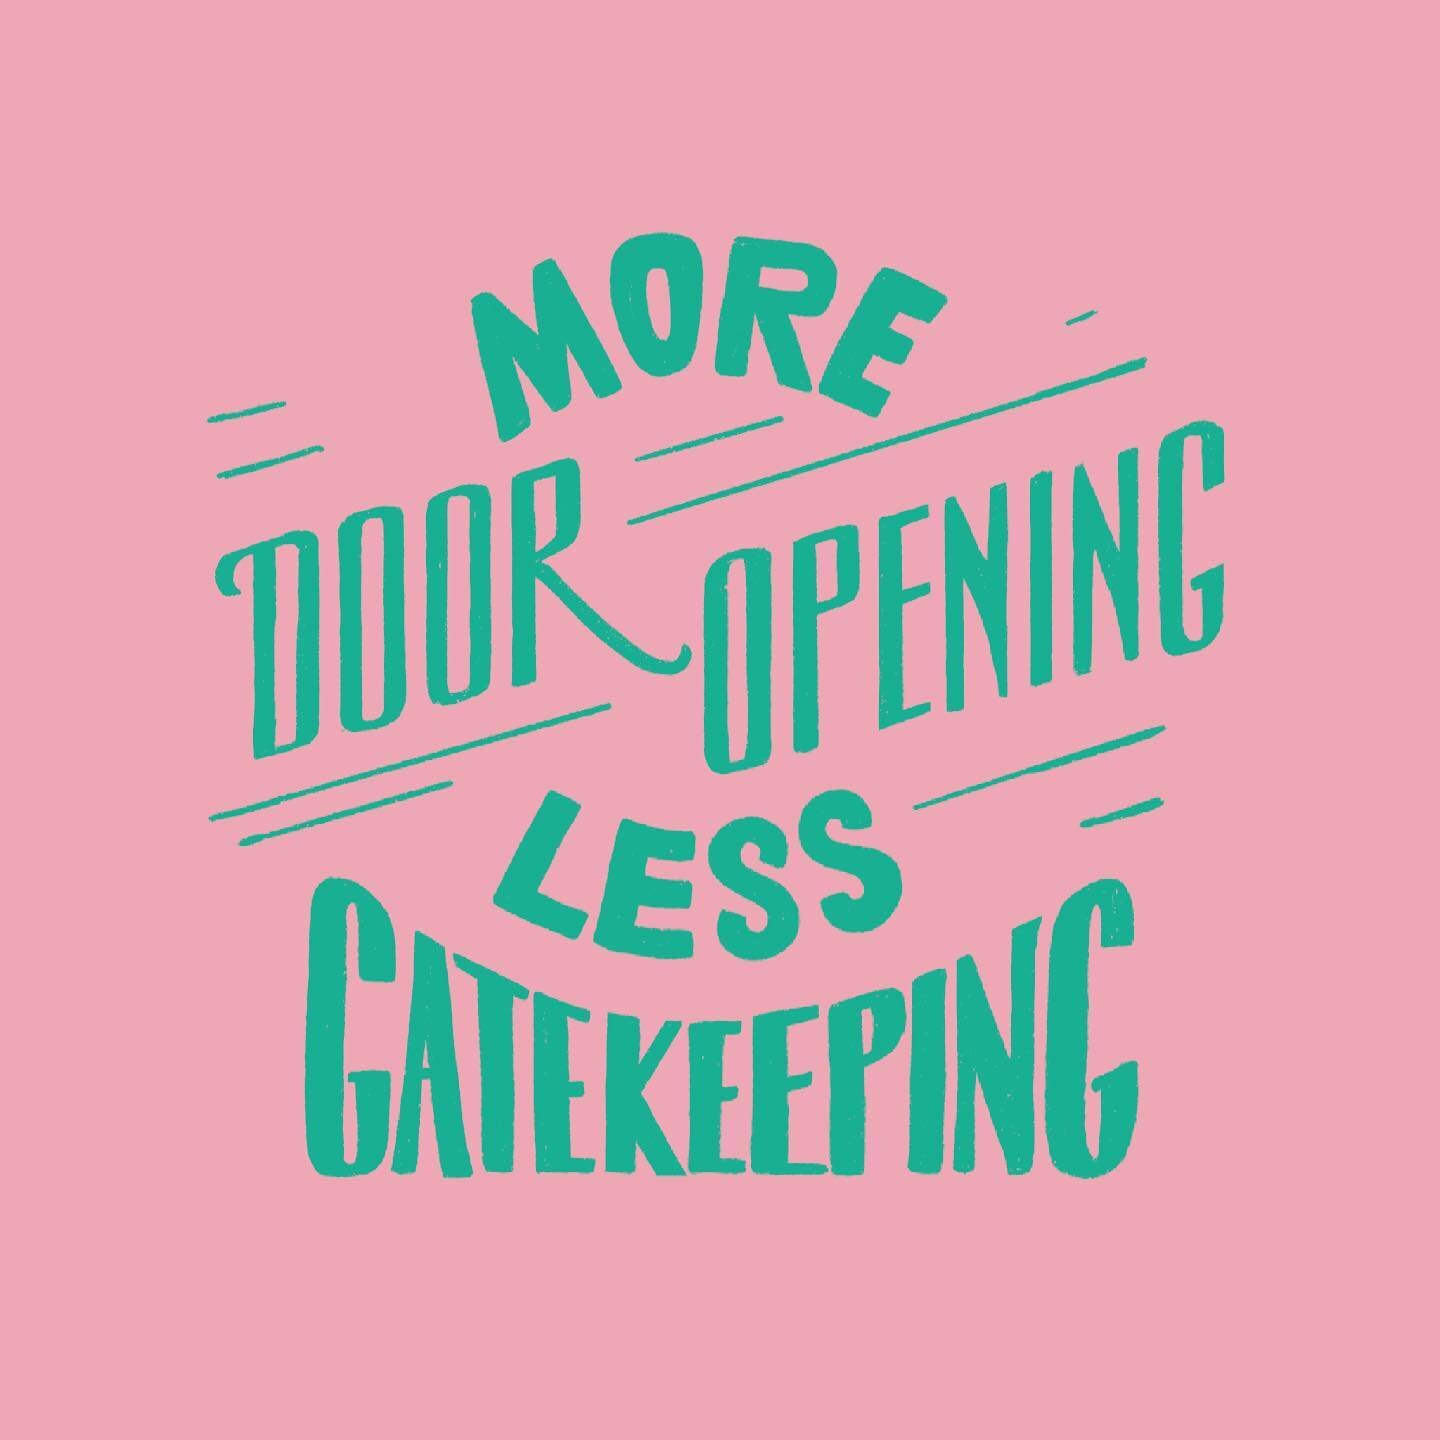 On International Women&rsquo;s Day, and always, meditating on ways to remember to open doors and opportunities for all our sisters.

[image description]
Angled across a pink background is green lettering which reads &ldquo;More door opening less gate